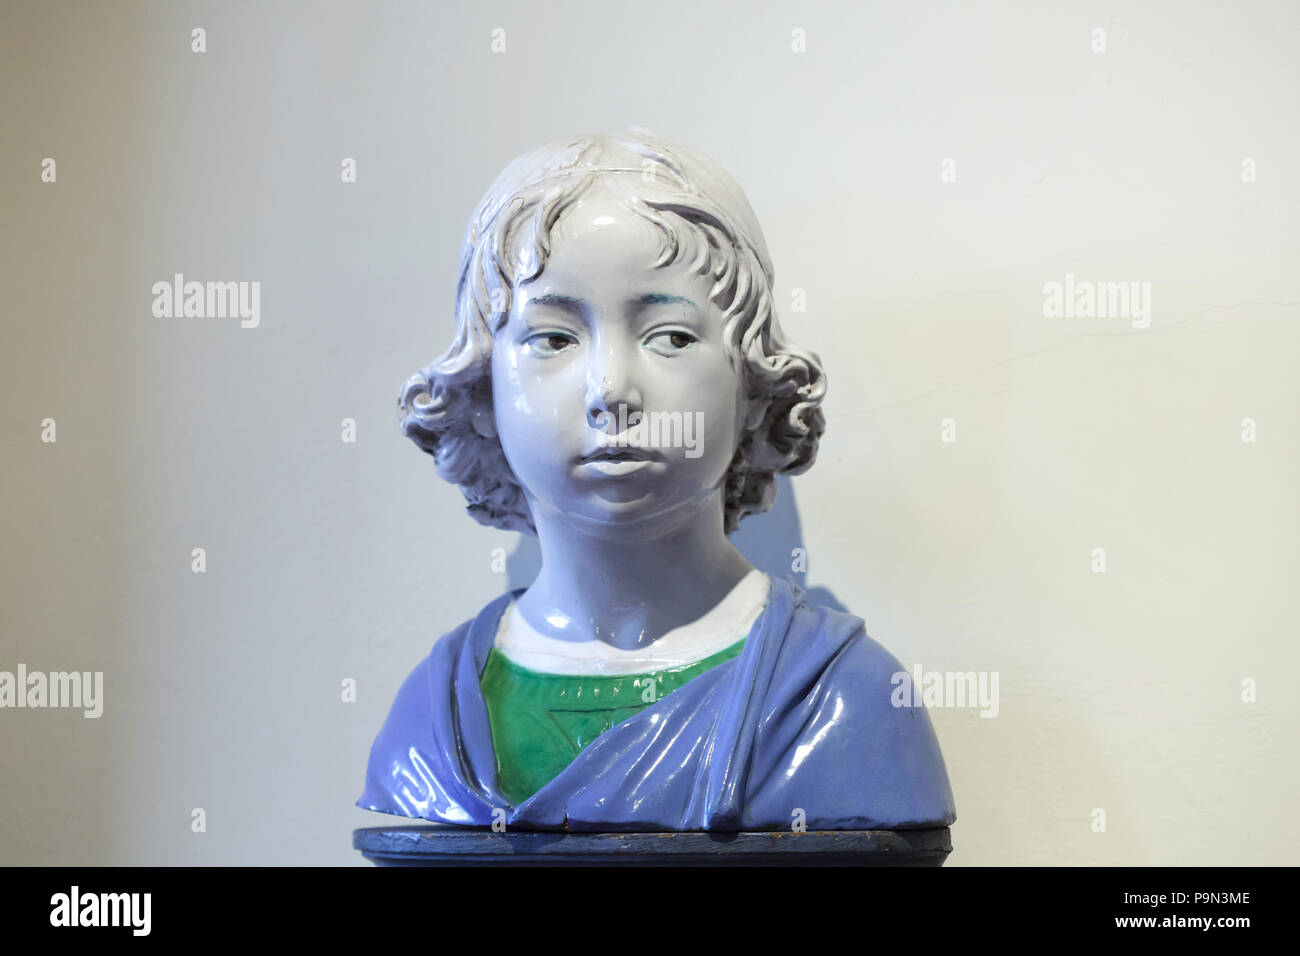 Portrait of a Boy. Glazed terracotta bust by Italian Renaissance sculptor Andrea della Robbia (ca. 1475-1480) on display in the Bargello Museum (Museo Nazionale del Bargello) in Florence, Tuscany, Italy. Stock Photo